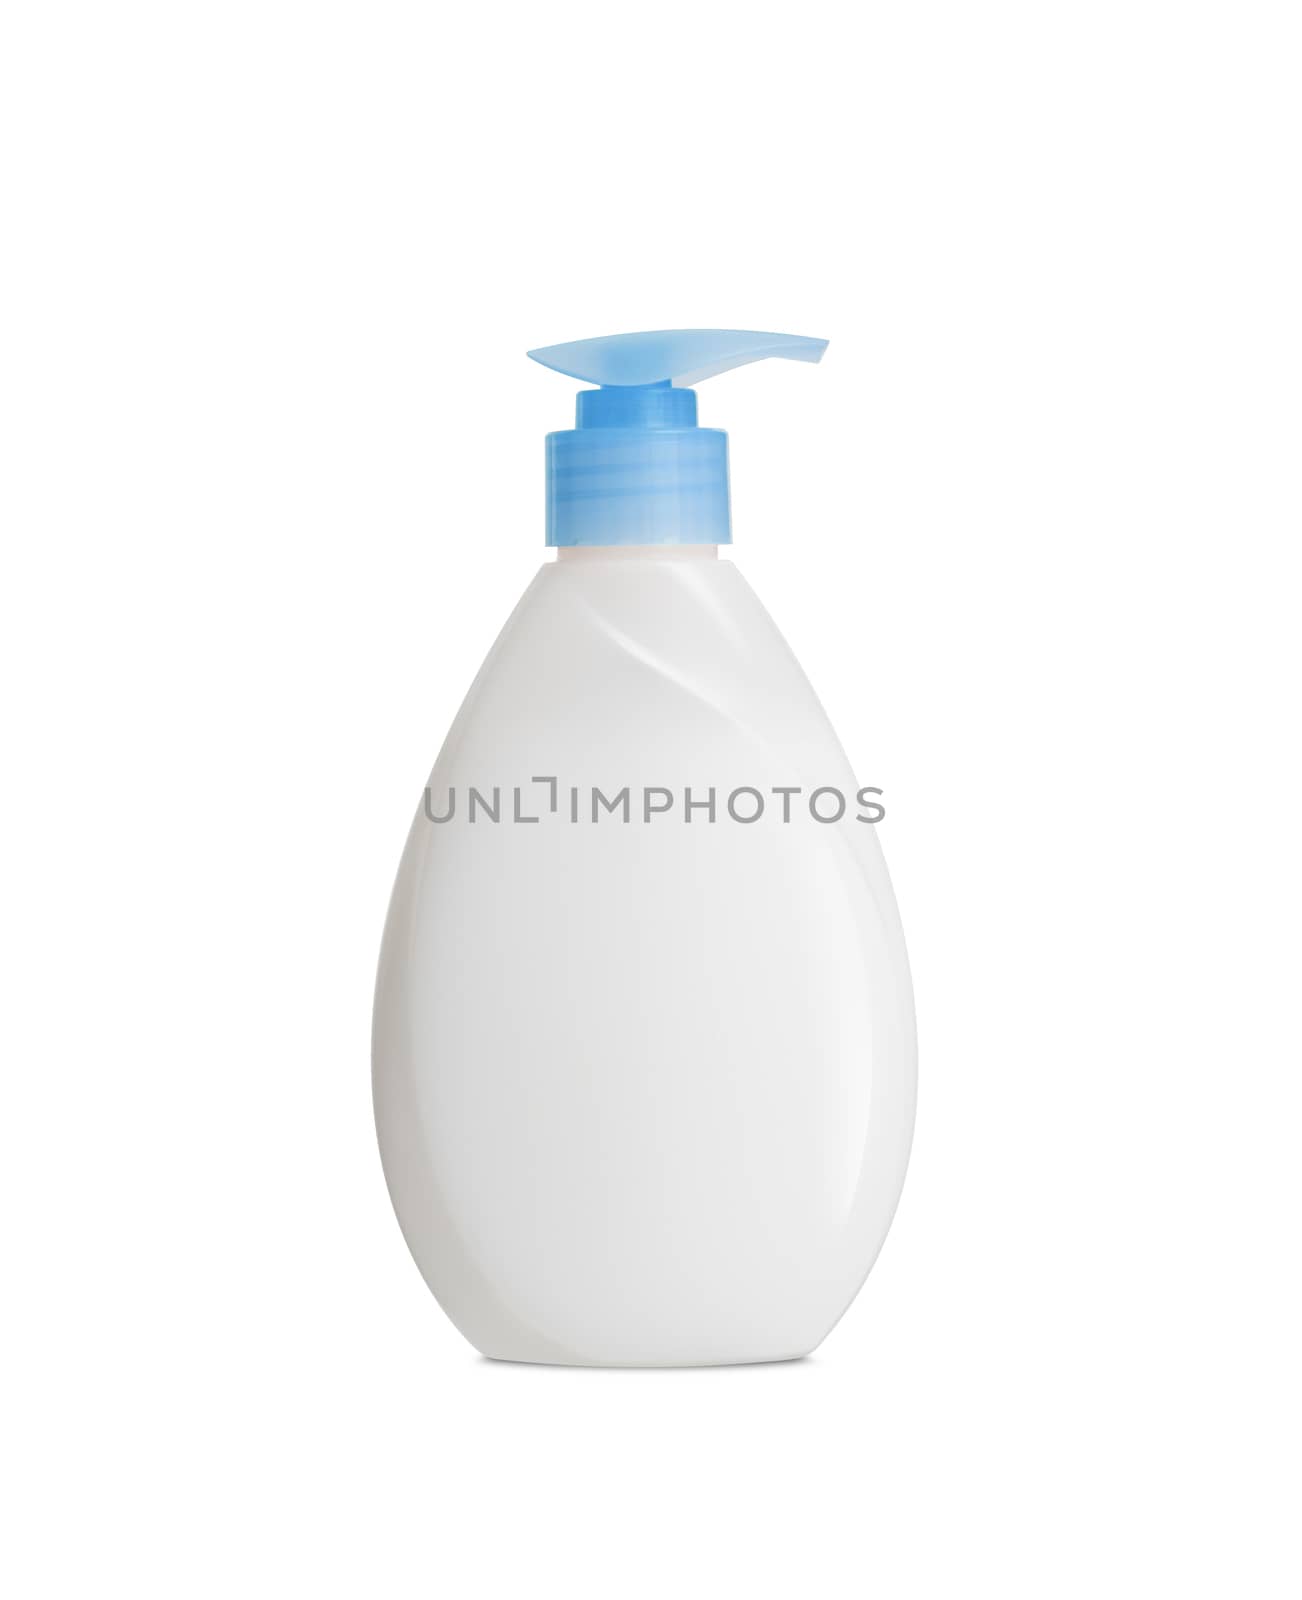 Plastic Bottle pomp with cosmetic liquid, soap or shampoo, gel. On a white background. With clipping path.